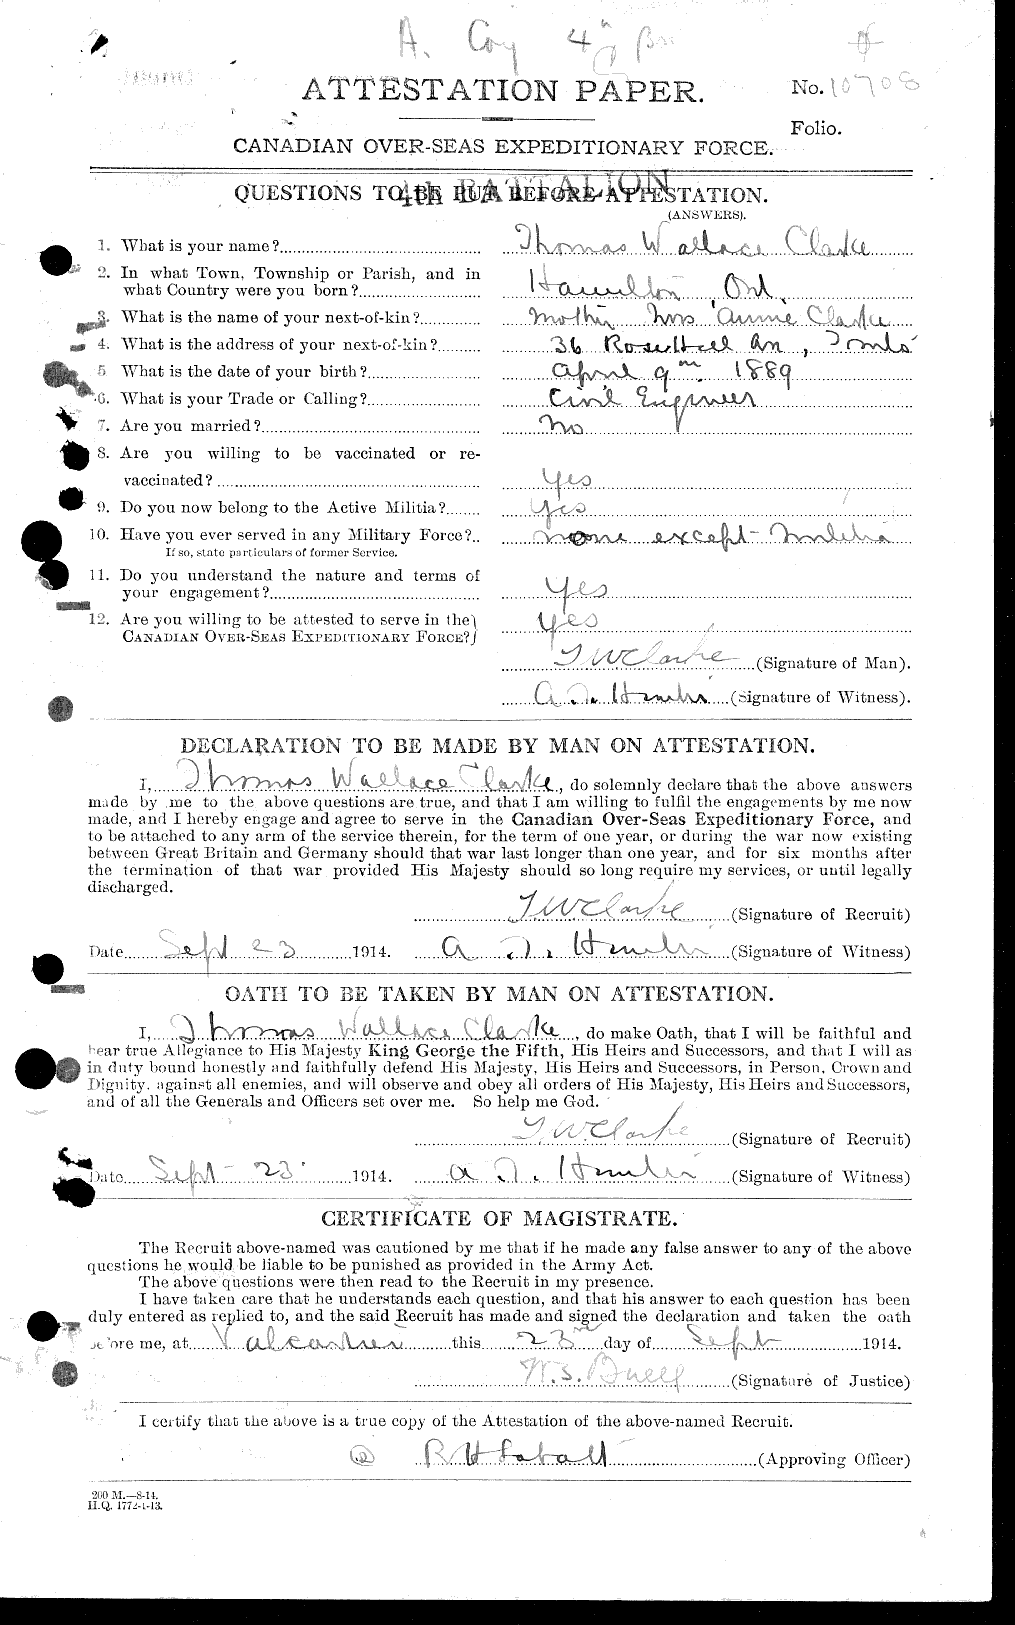 Personnel Records of the First World War - CEF 018830a